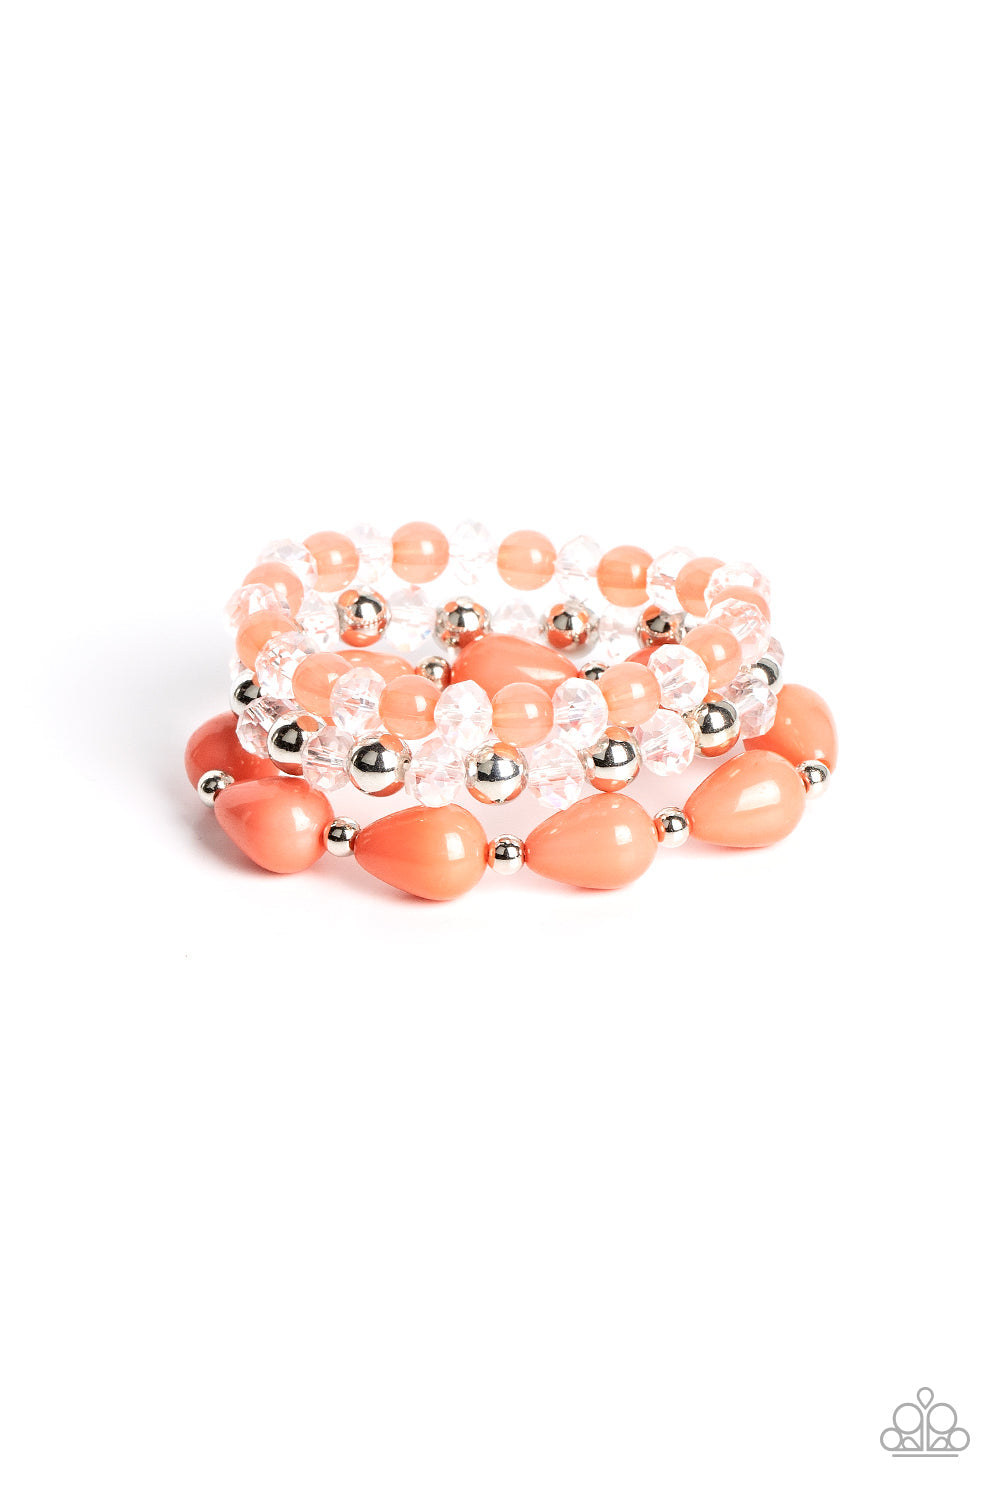 Beachside Brunch - Orange - Coral and Silver Stretchy Bracelets - Assortment of crystal-like beads, silver beads, opaque coral beads, and coral teardrop beads are threaded along stretchy bands around the wrist, resulting in colorful layers.